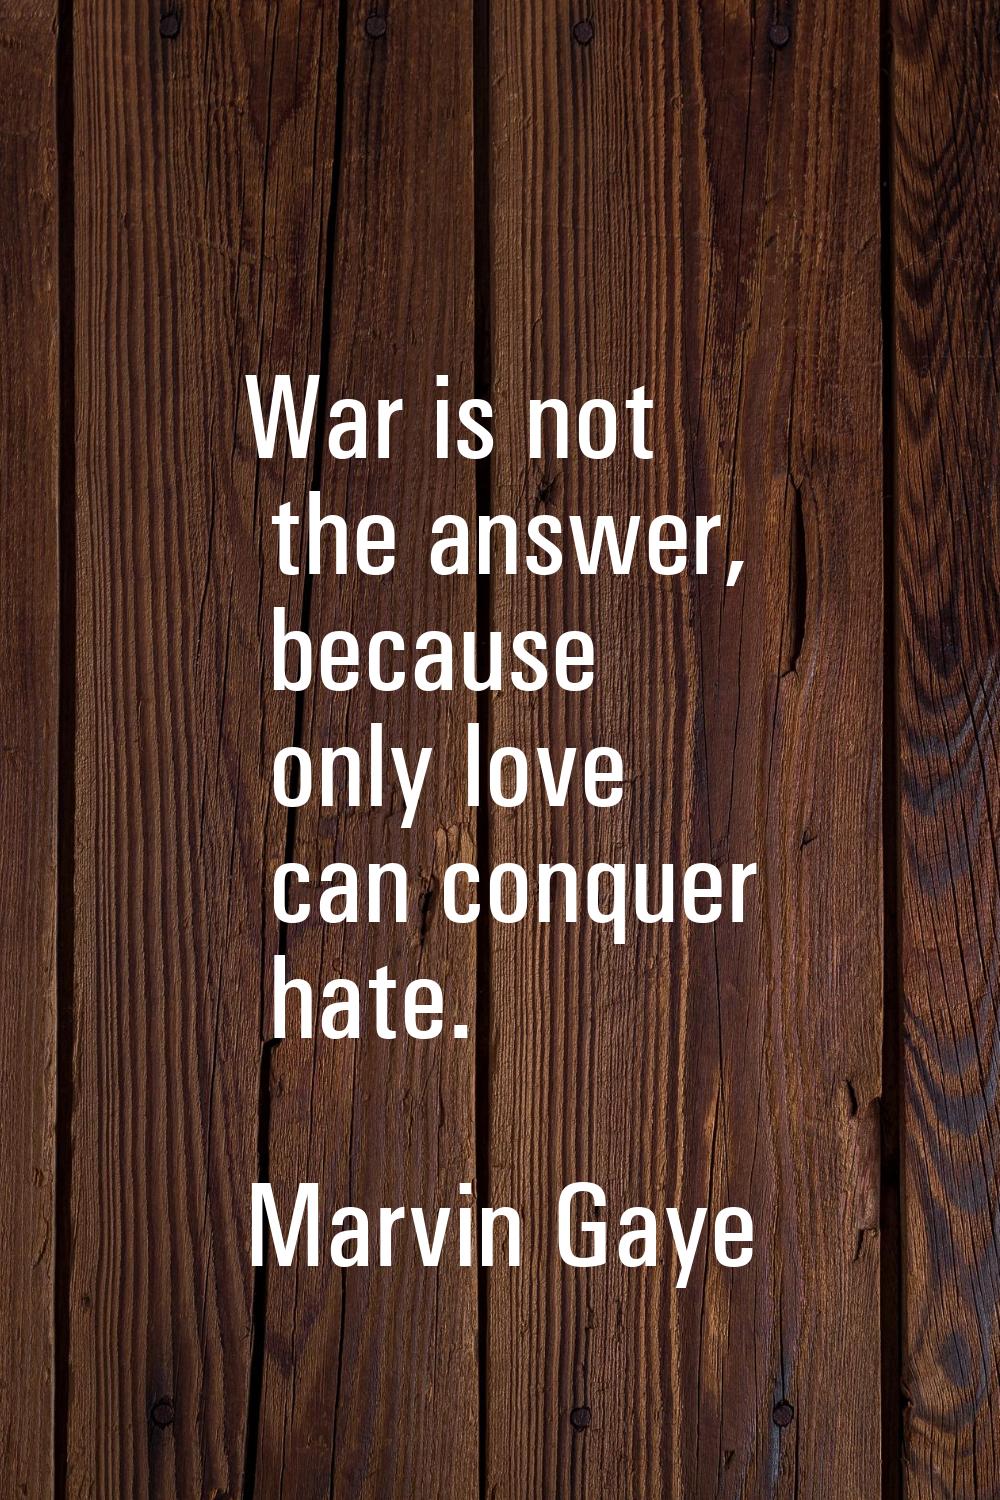 War is not the answer, because only love can conquer hate.